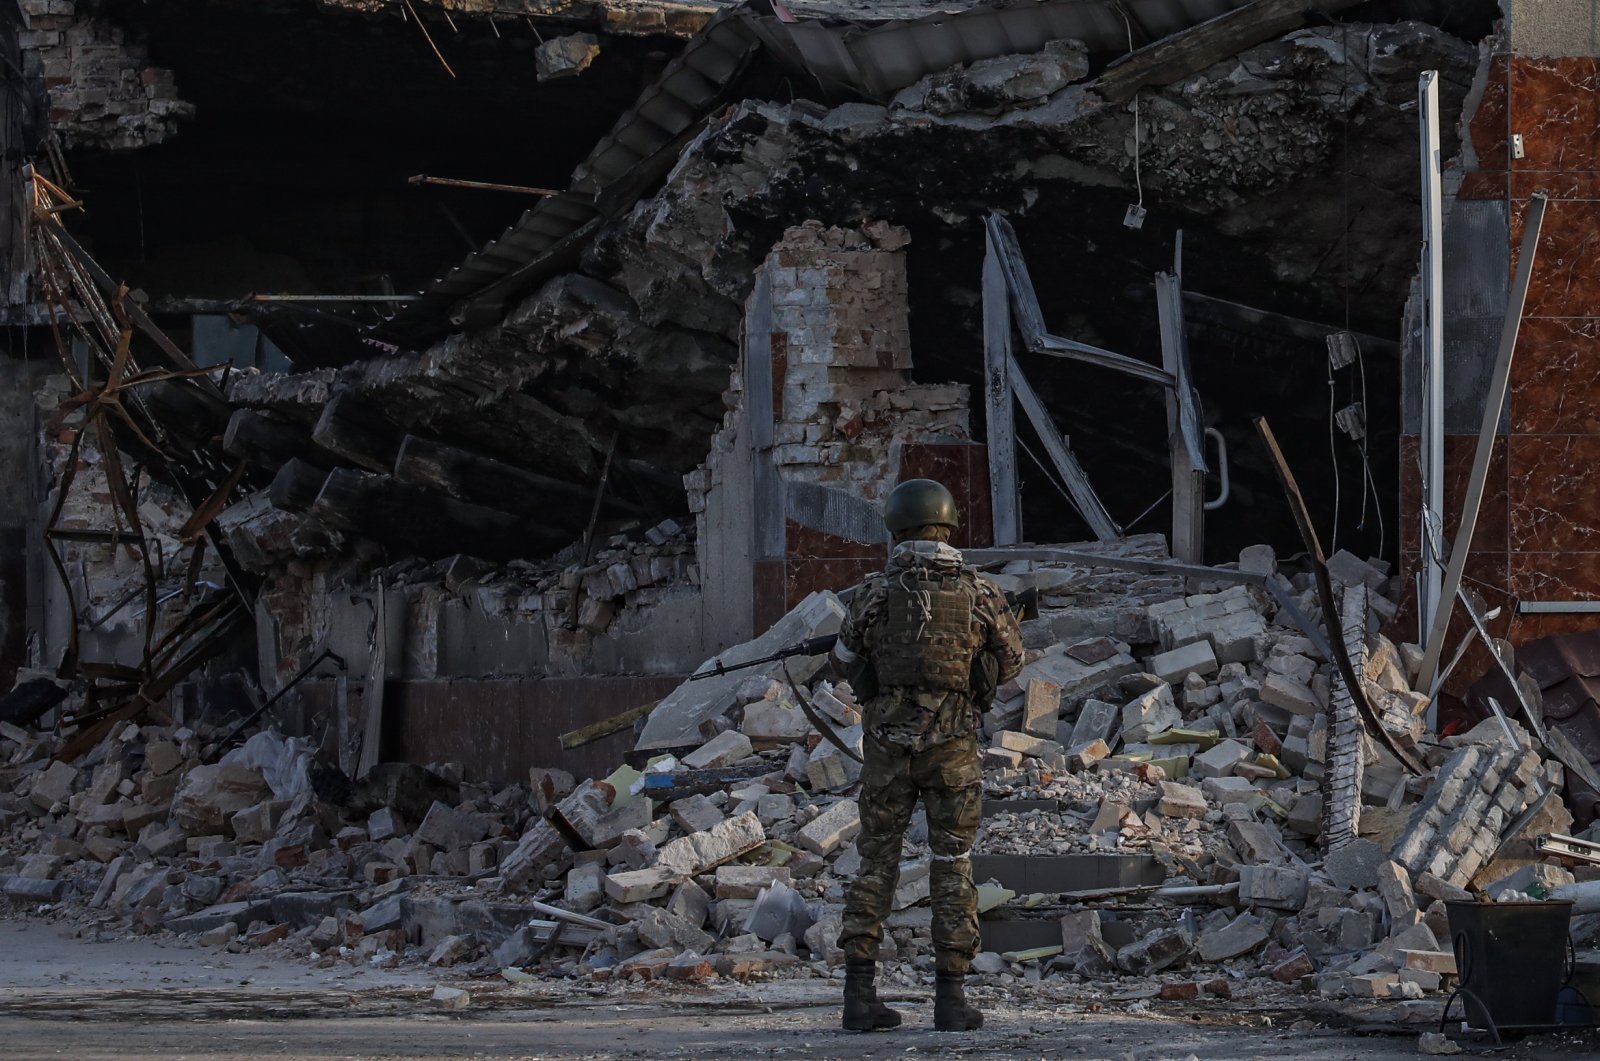 A Russian soldier examines debris of a store in downtown Volnovakha, Ukraine, March 26, 2022. (EPA Photo)